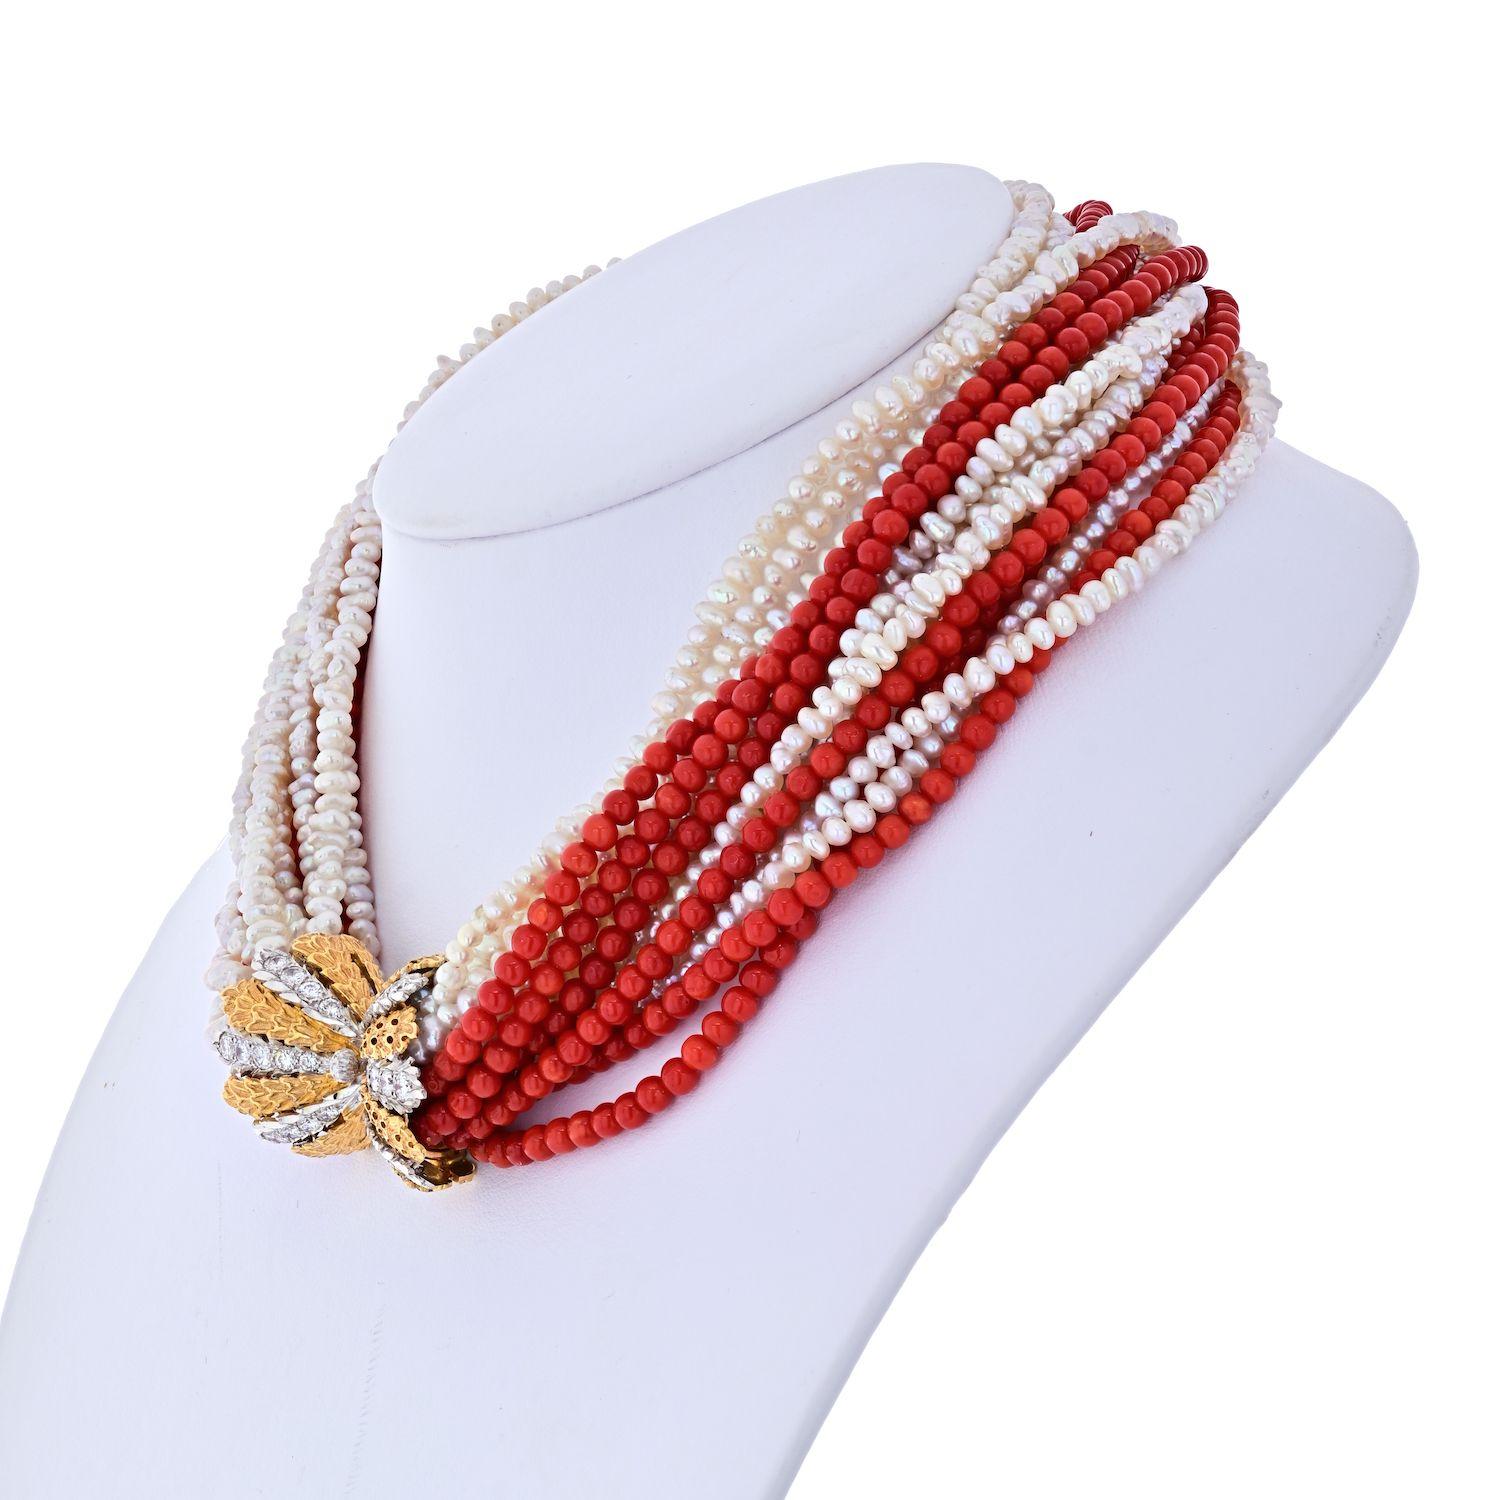 Fabulous elegant necklace created by Mario Buccellati in Italy in the 1950's. Features ten strands of white freshwater pearls and six strands of Mediterranean coral connected with a diamond and yellow & white gold clasp. The necklace has a lot of